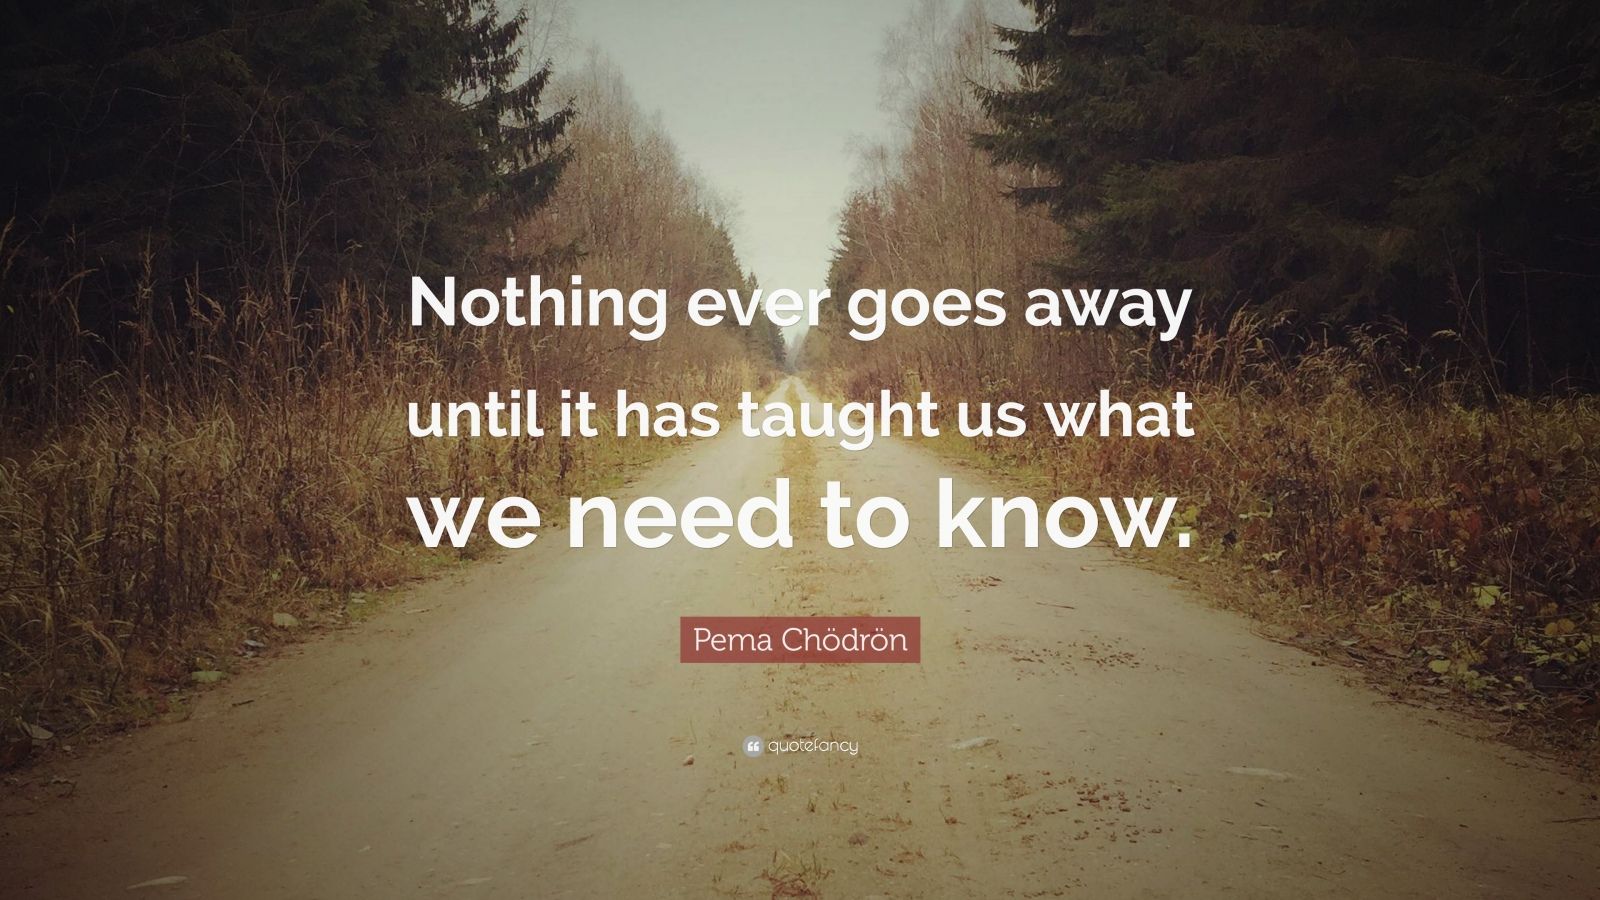 Pema Chödrön Quote: “Nothing ever goes away until it has taught us what ...